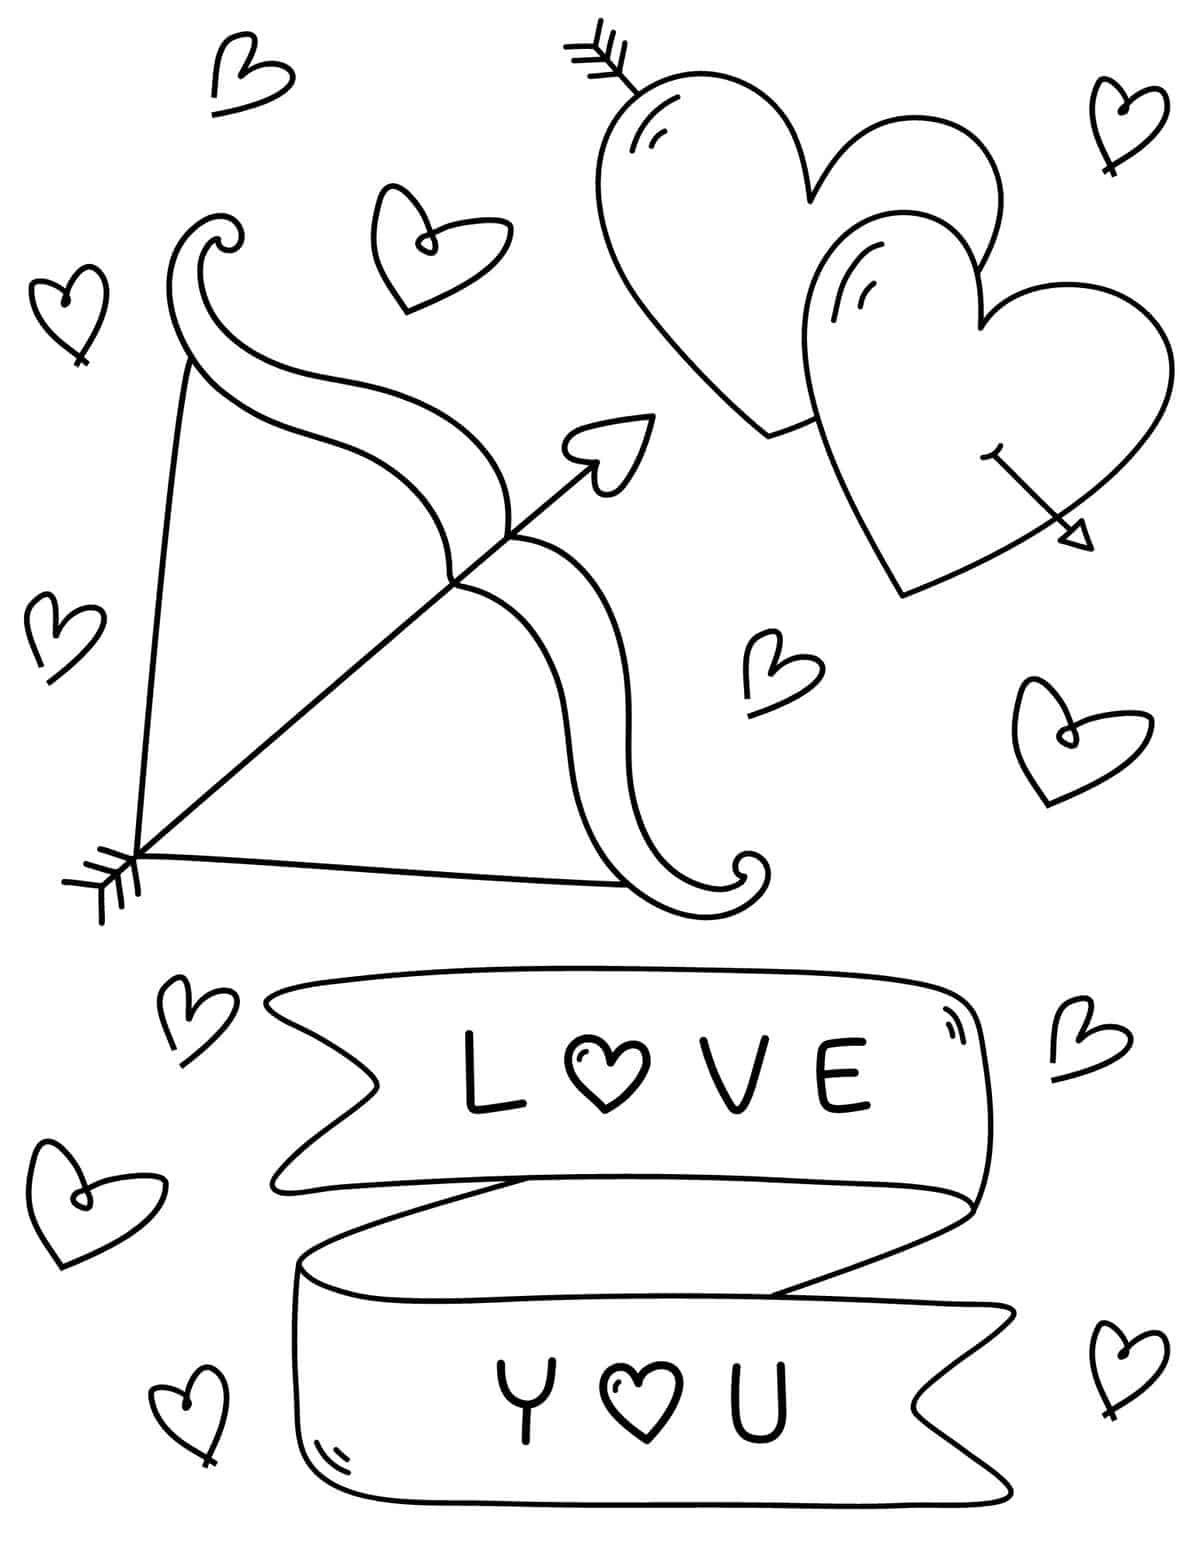 love banner with Cupid's bow Valentine's Day coloring page